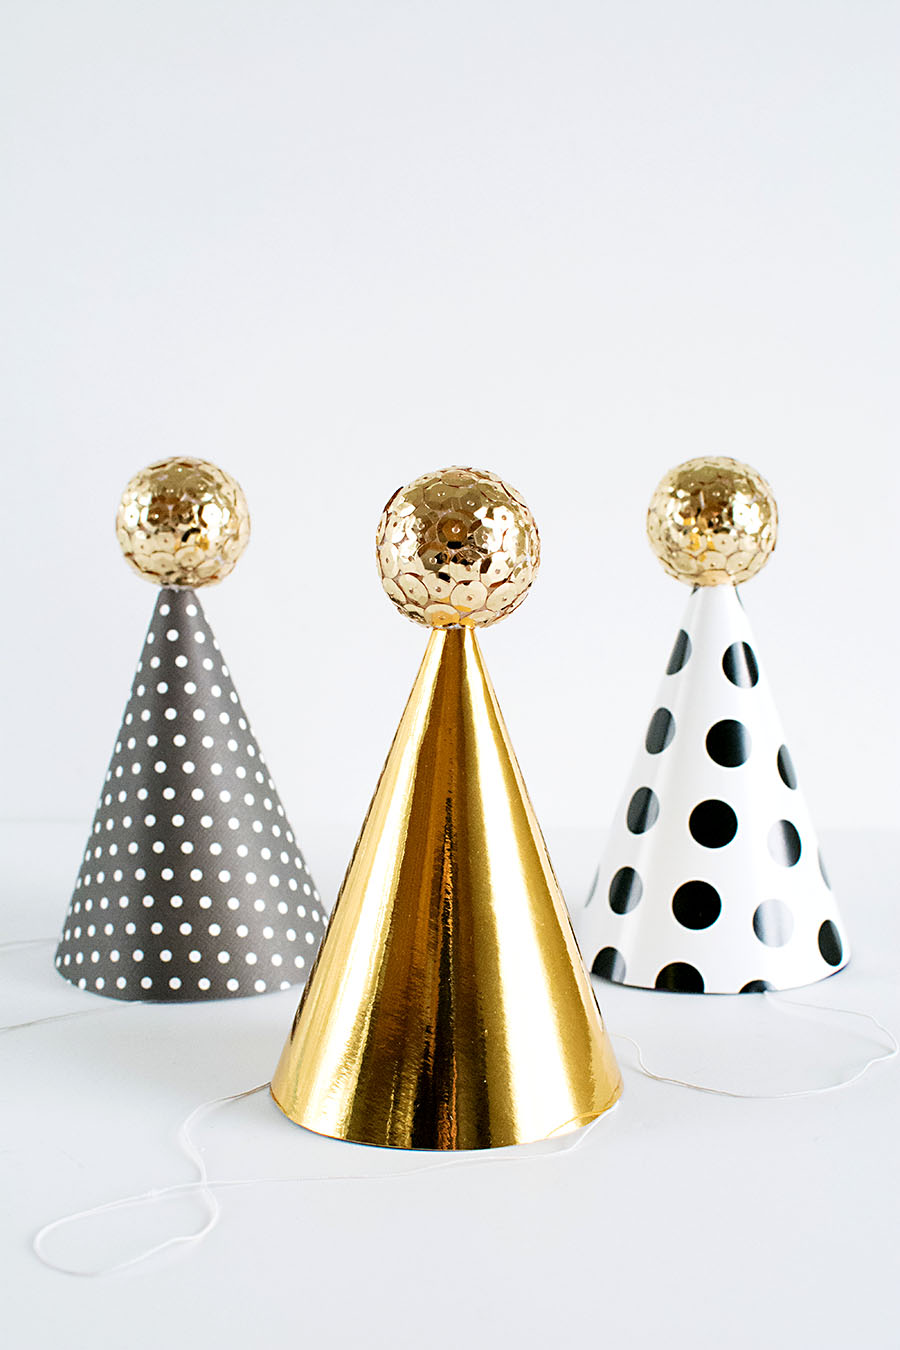 DIY Mini Party Hats for New Year's Eve